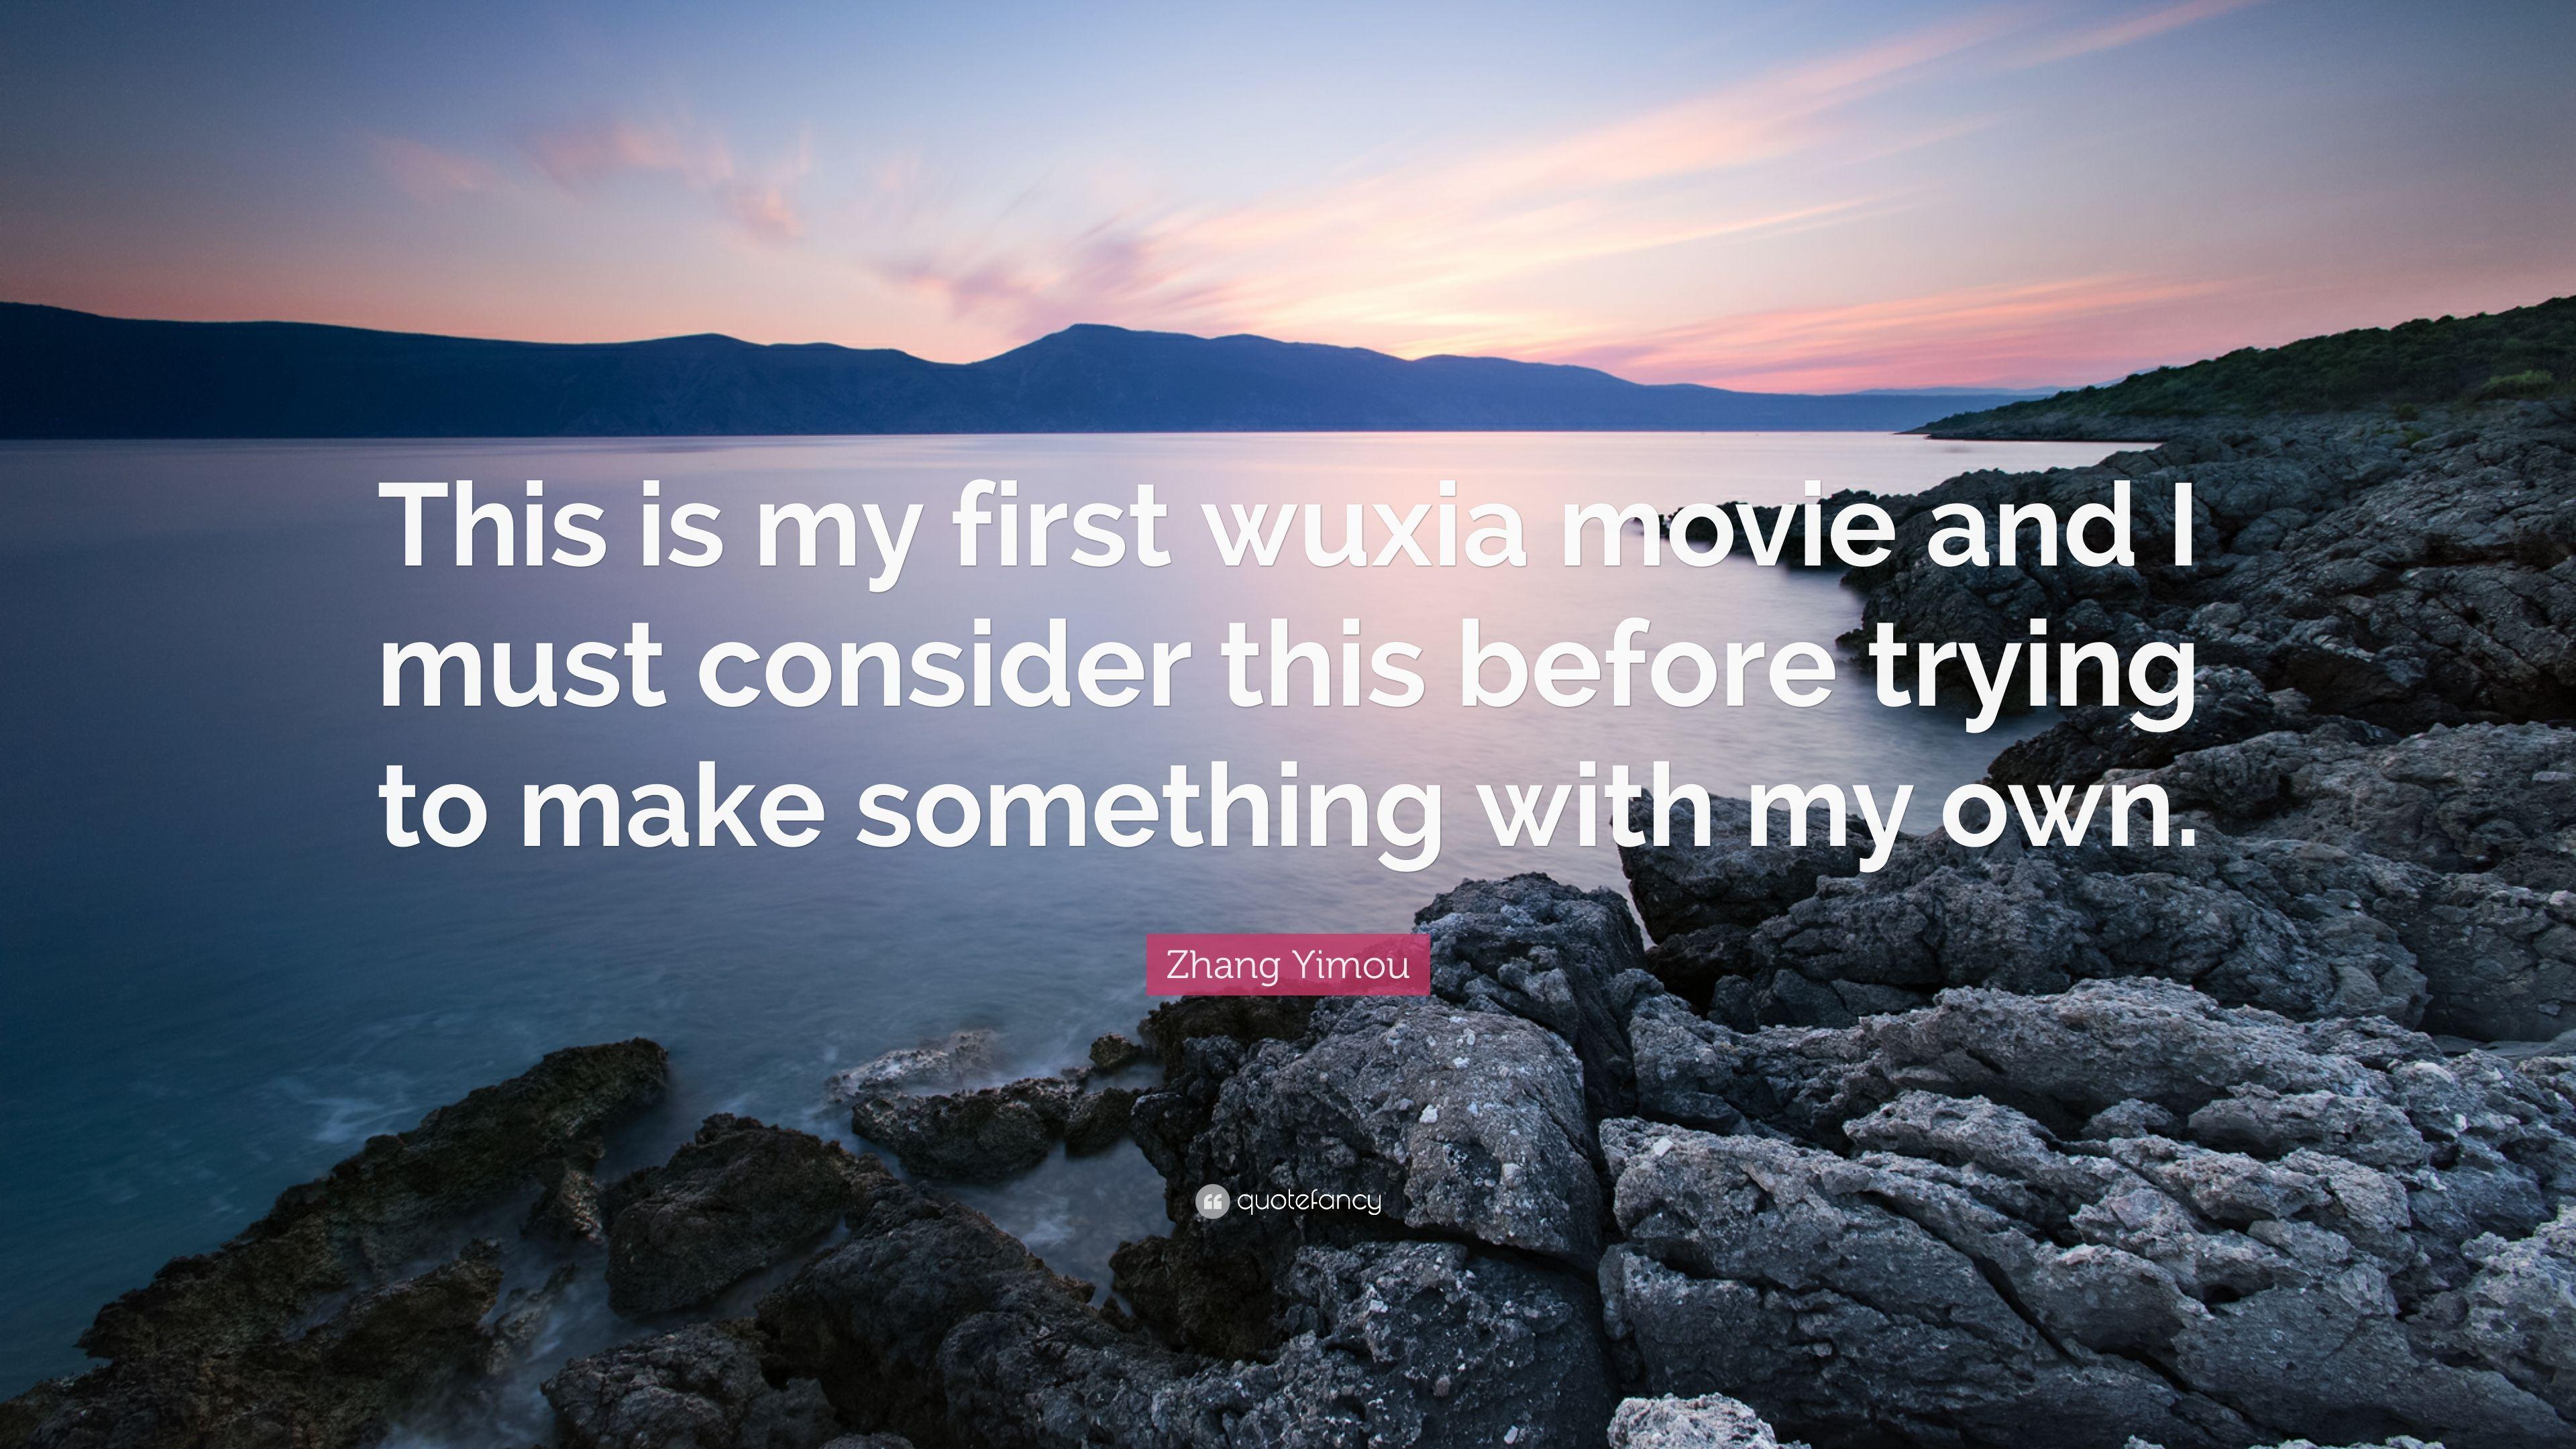 Zhang Yimou Quote: “This is my first wuxia movie and I must consider